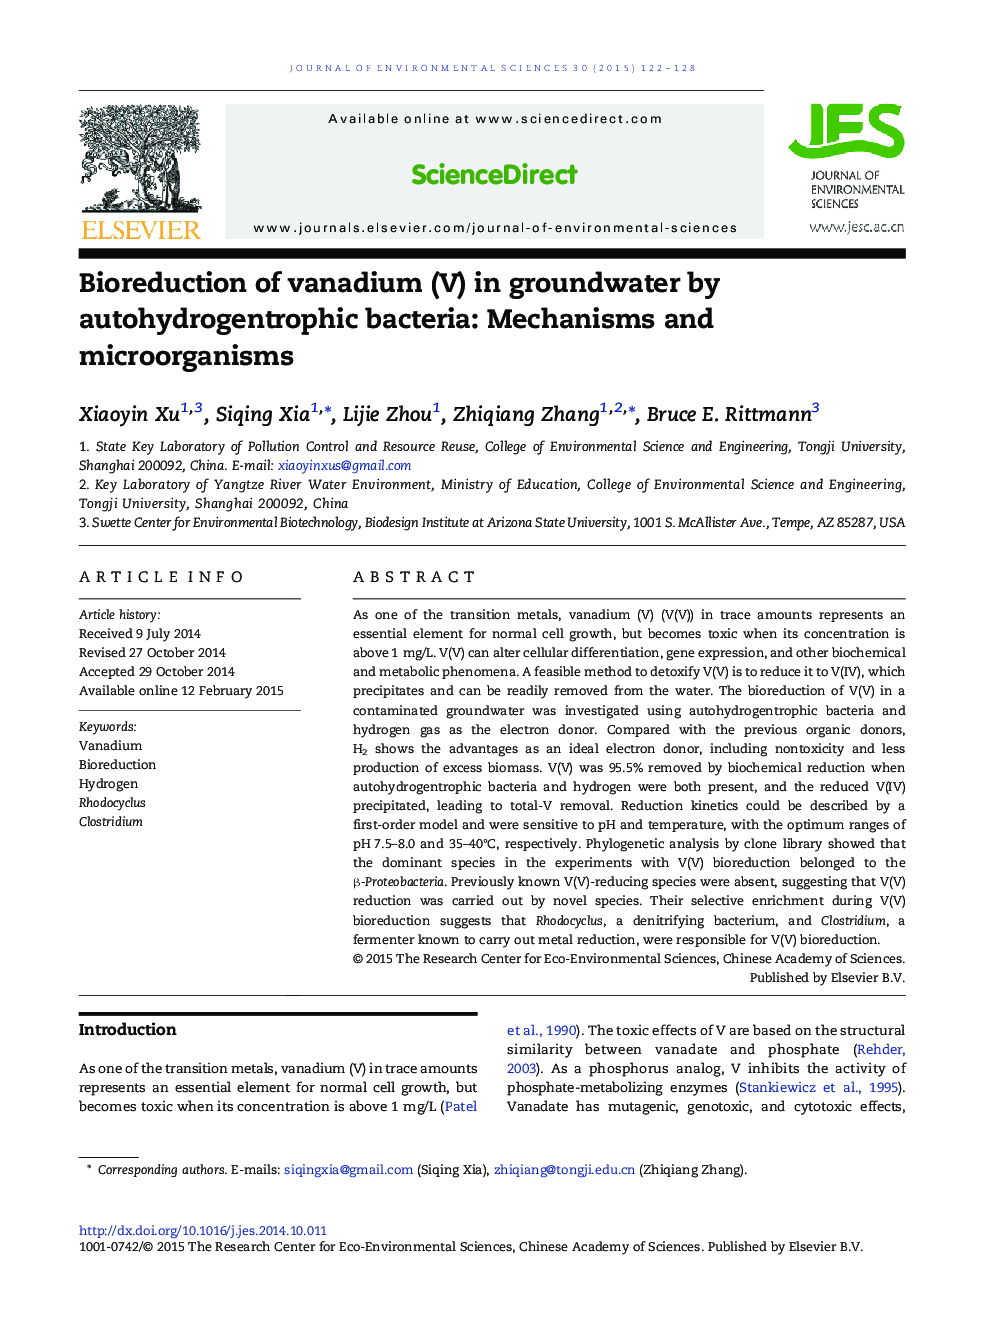 Bioreduction of vanadium (V) in groundwater by autohydrogentrophic bacteria: Mechanisms and microorganisms